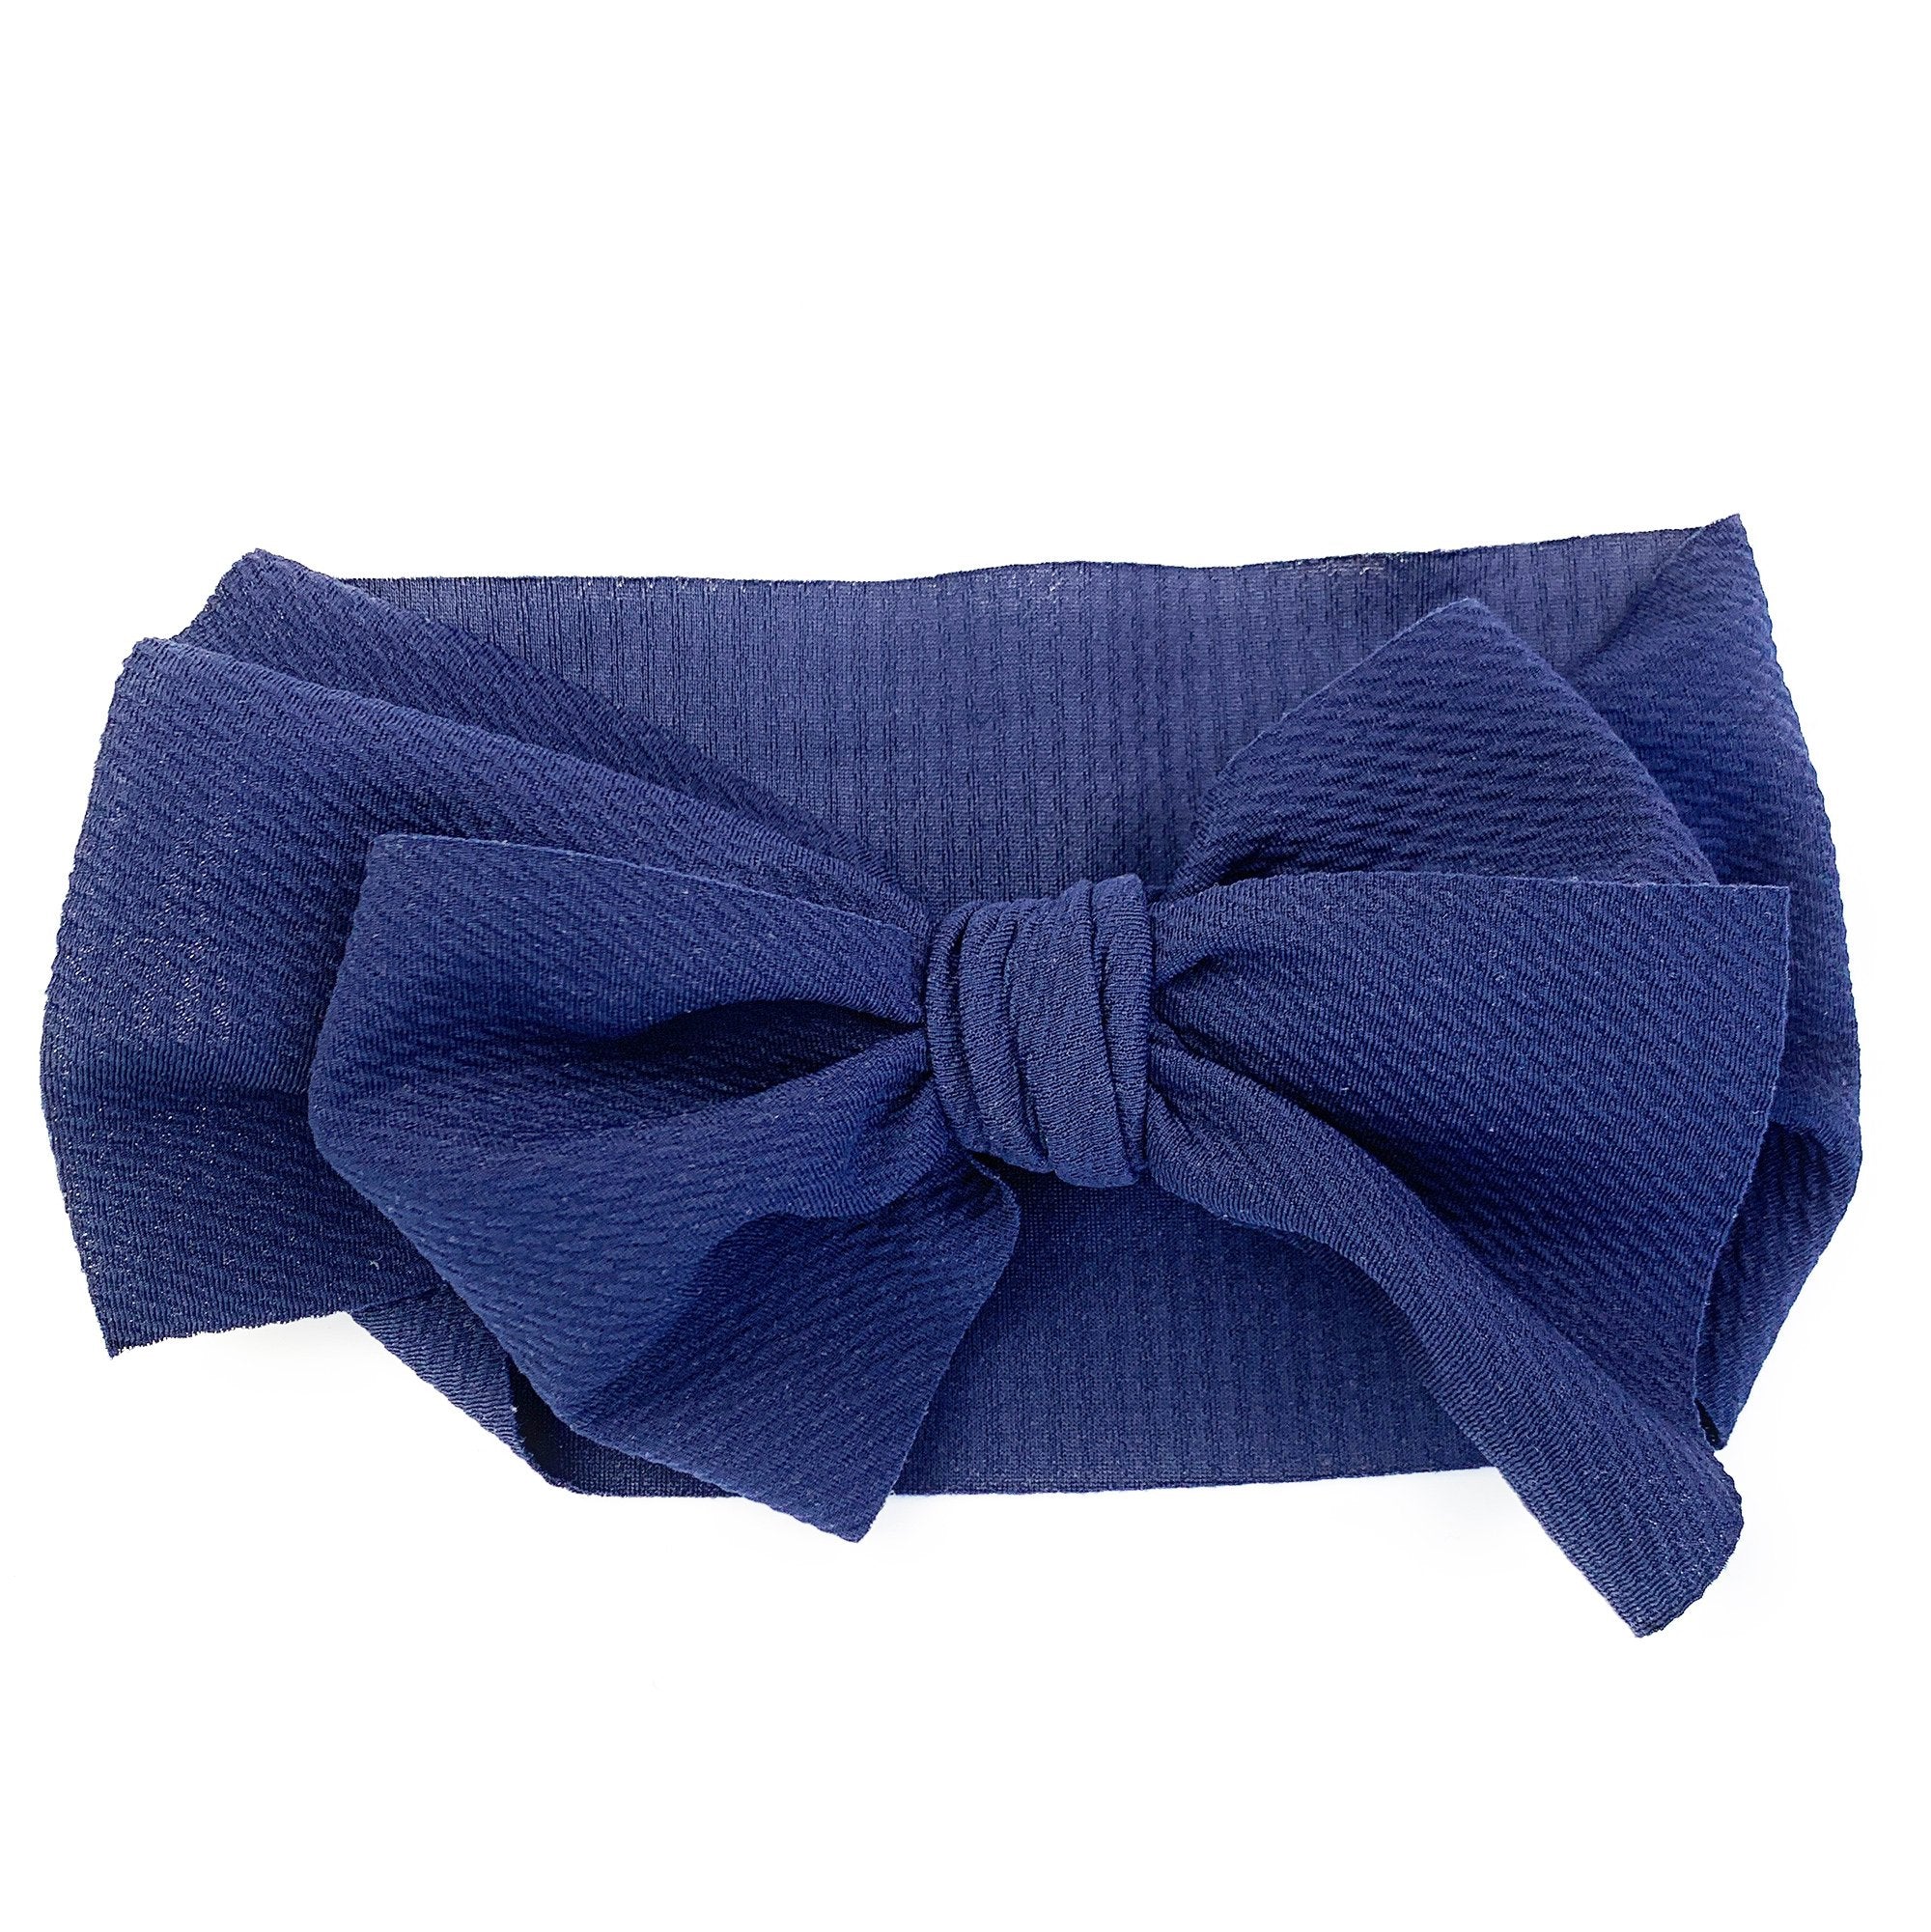 Handmade Extra Large Royal Blue Hair Bow, Royal Blue Hair Bow Texas Size 6 inch (Shown) / Permanently Attached to Headband